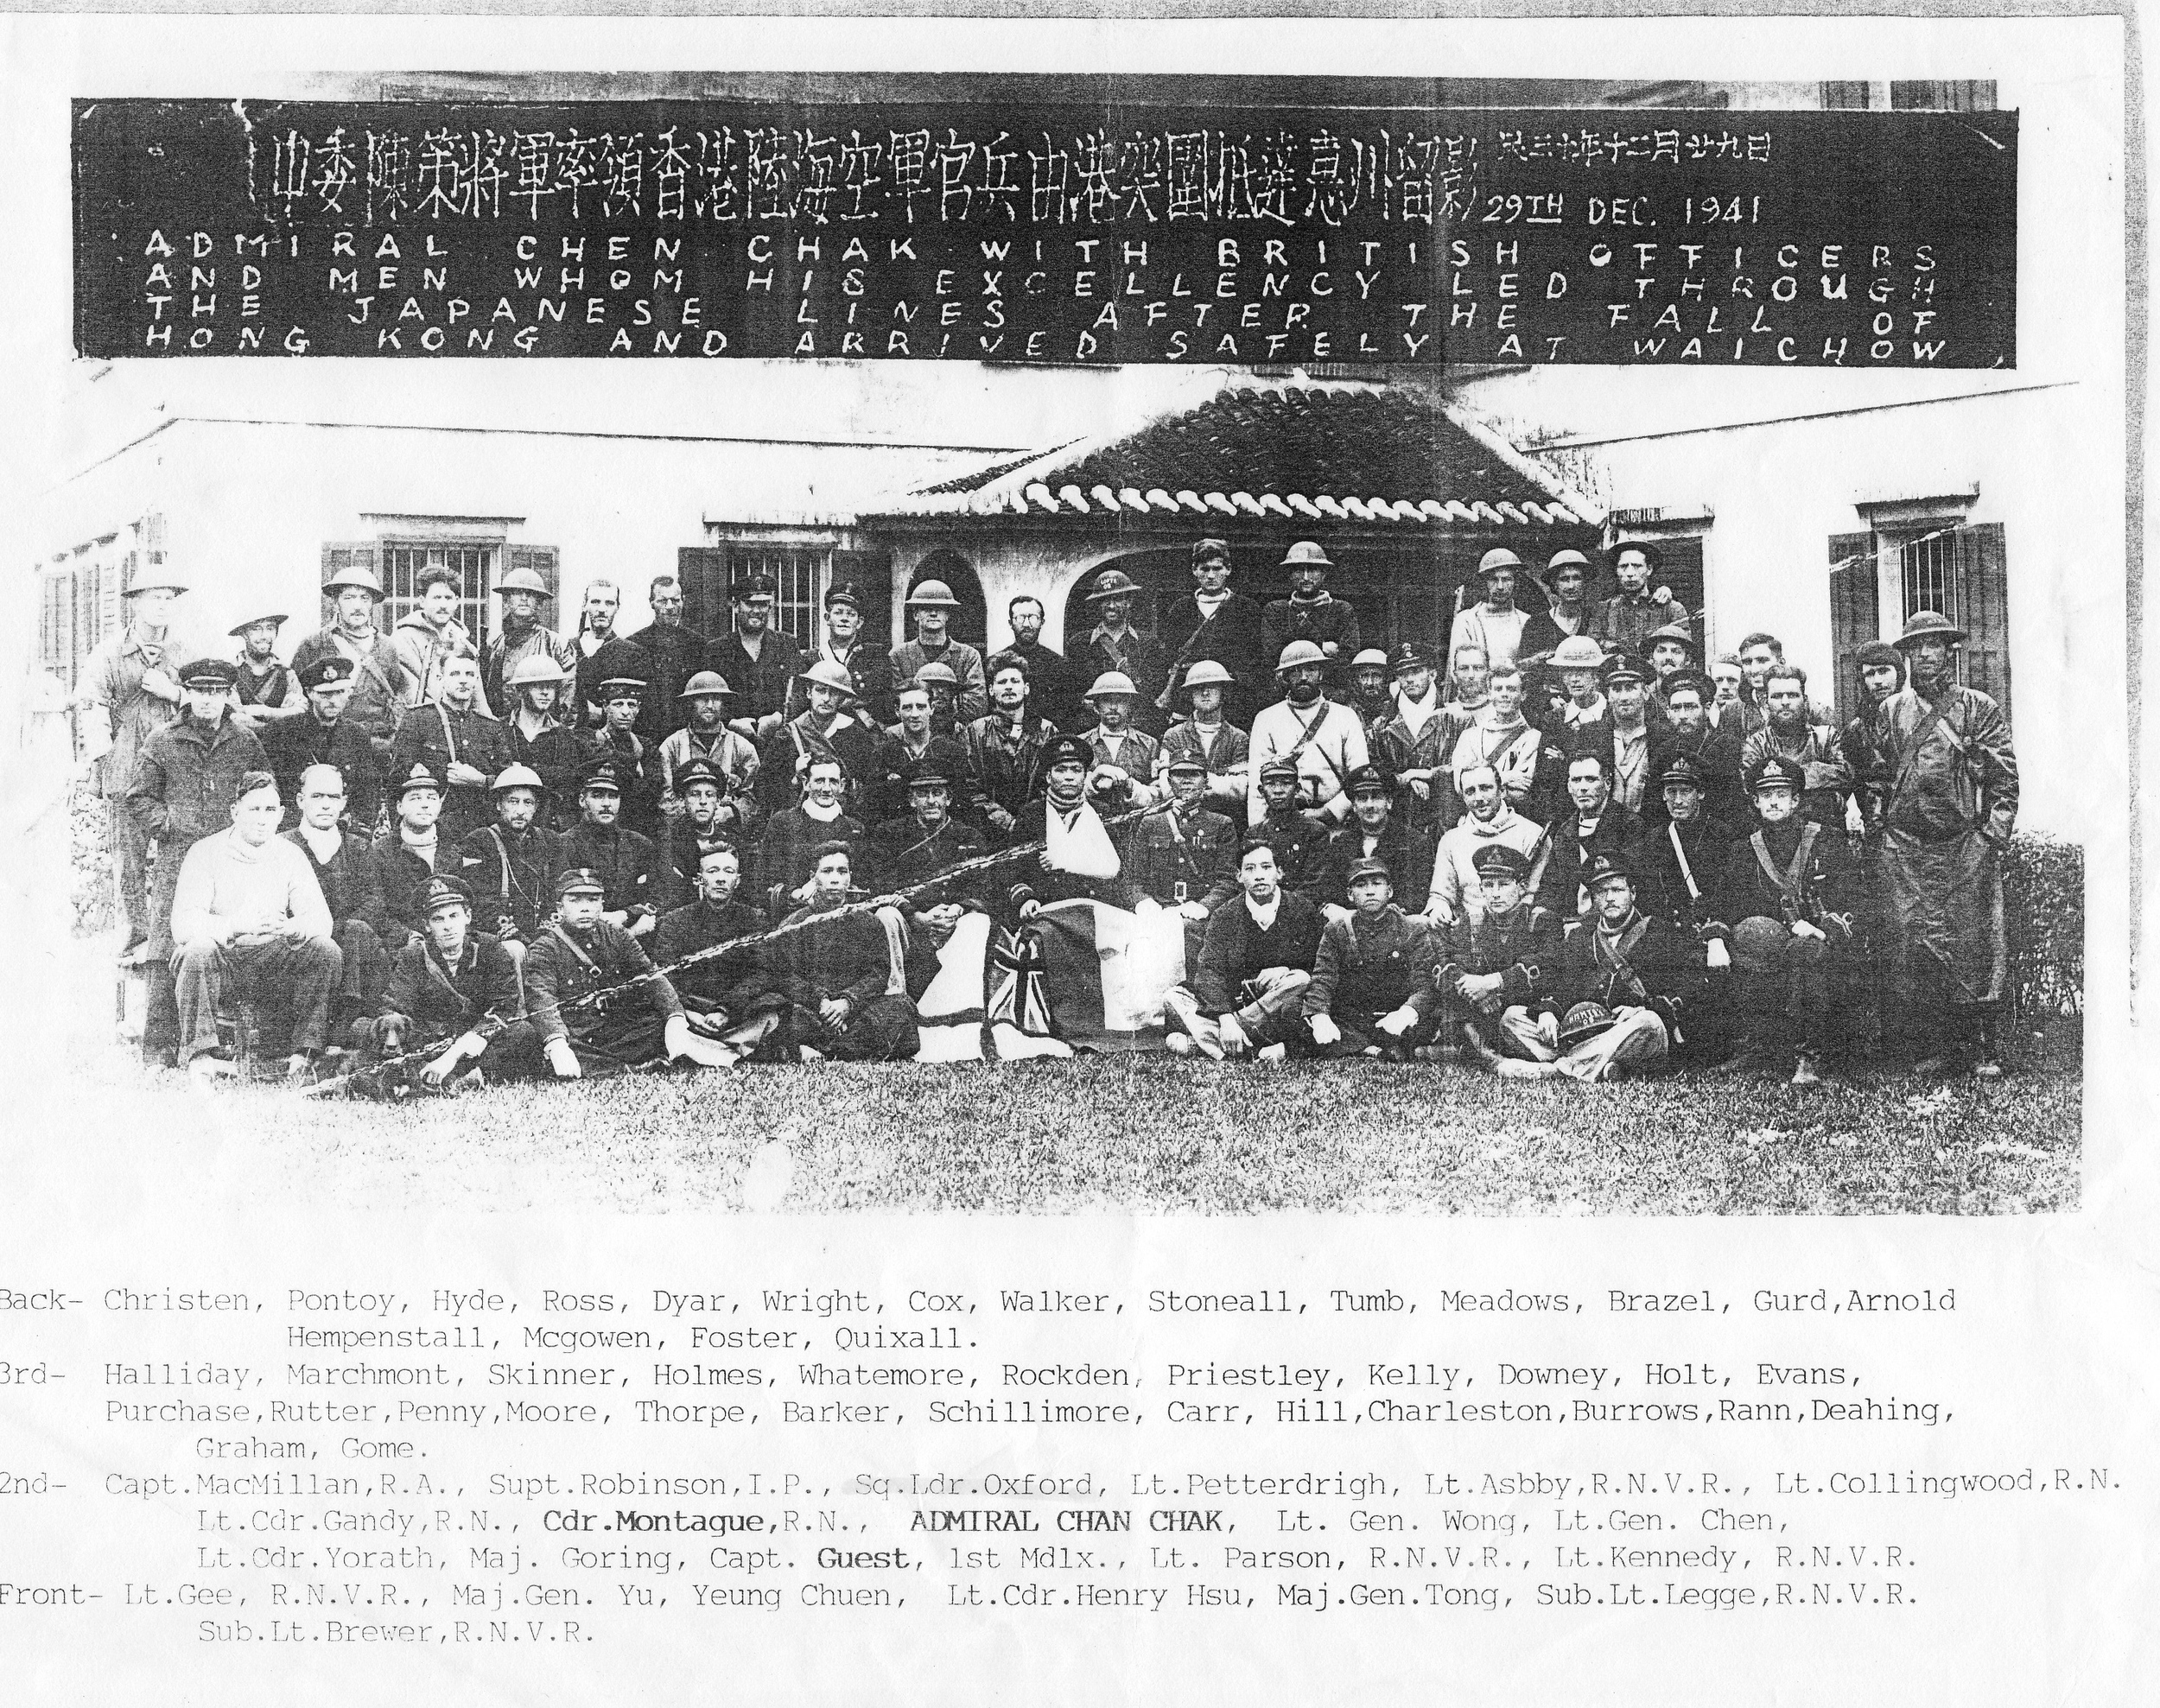 The escape group in Huizhou, with Max (second row, third from left), December 30, 1941